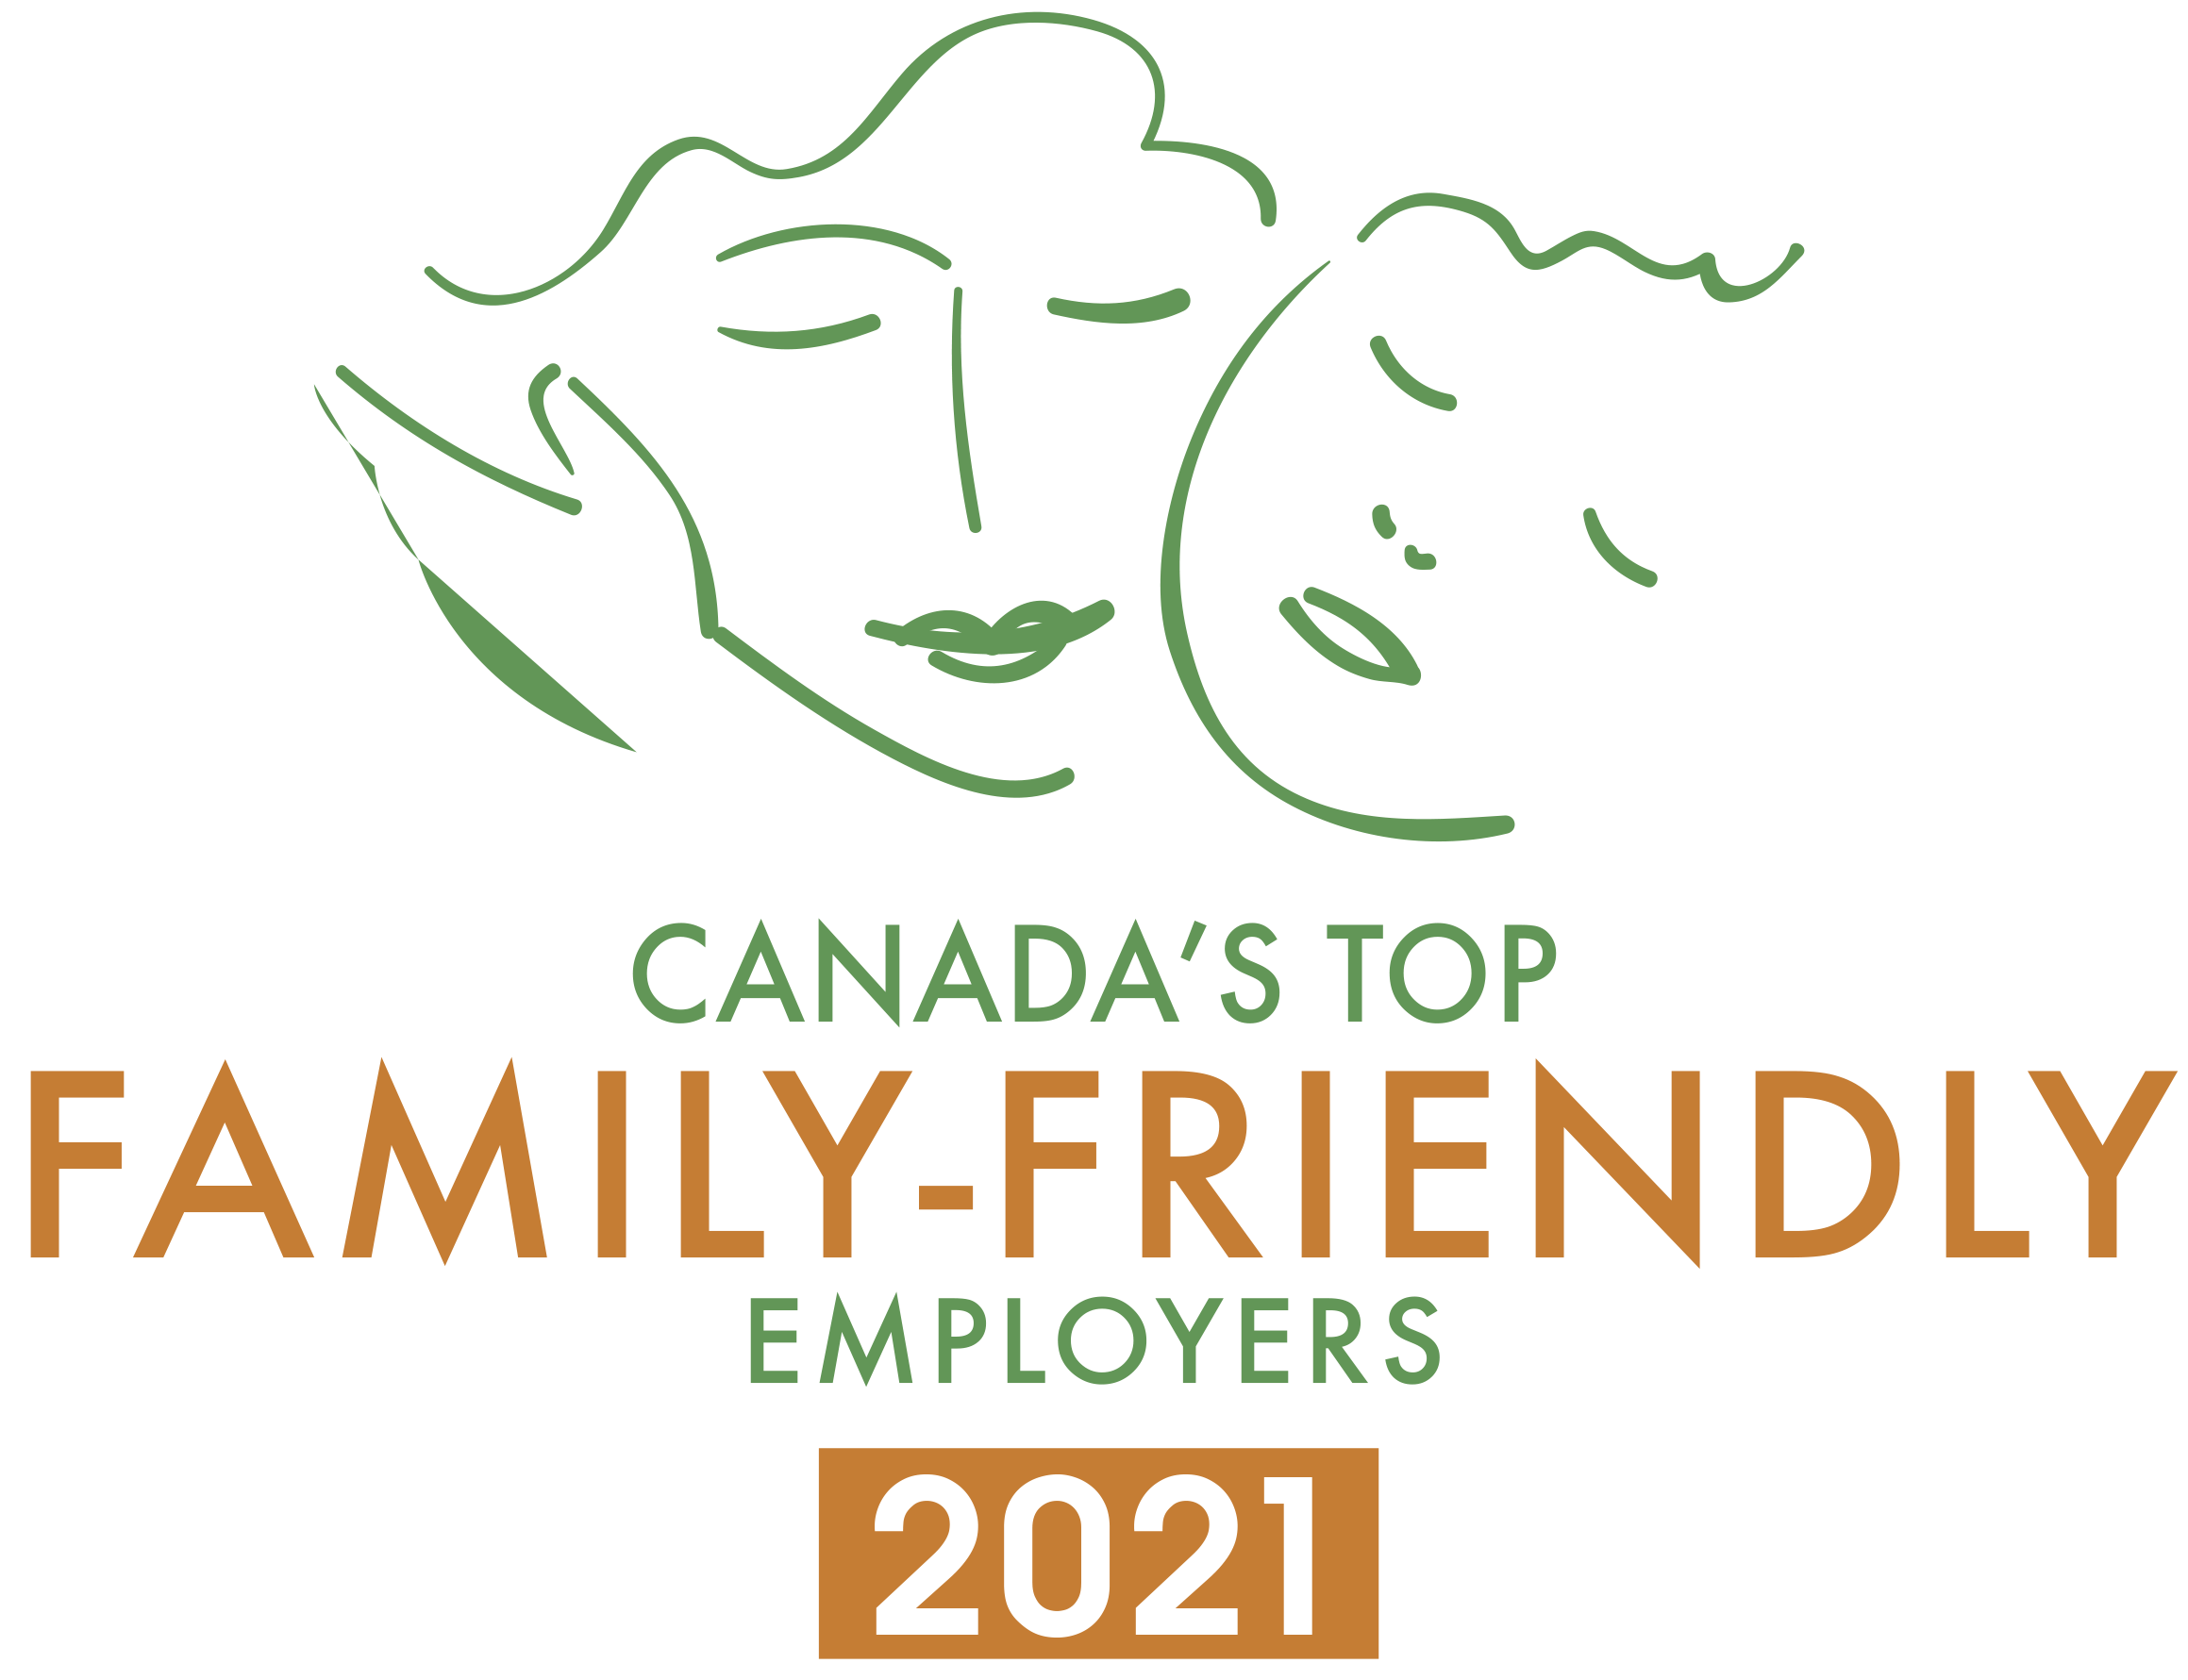 Canada's Top Family-Friendly Employers (2021)